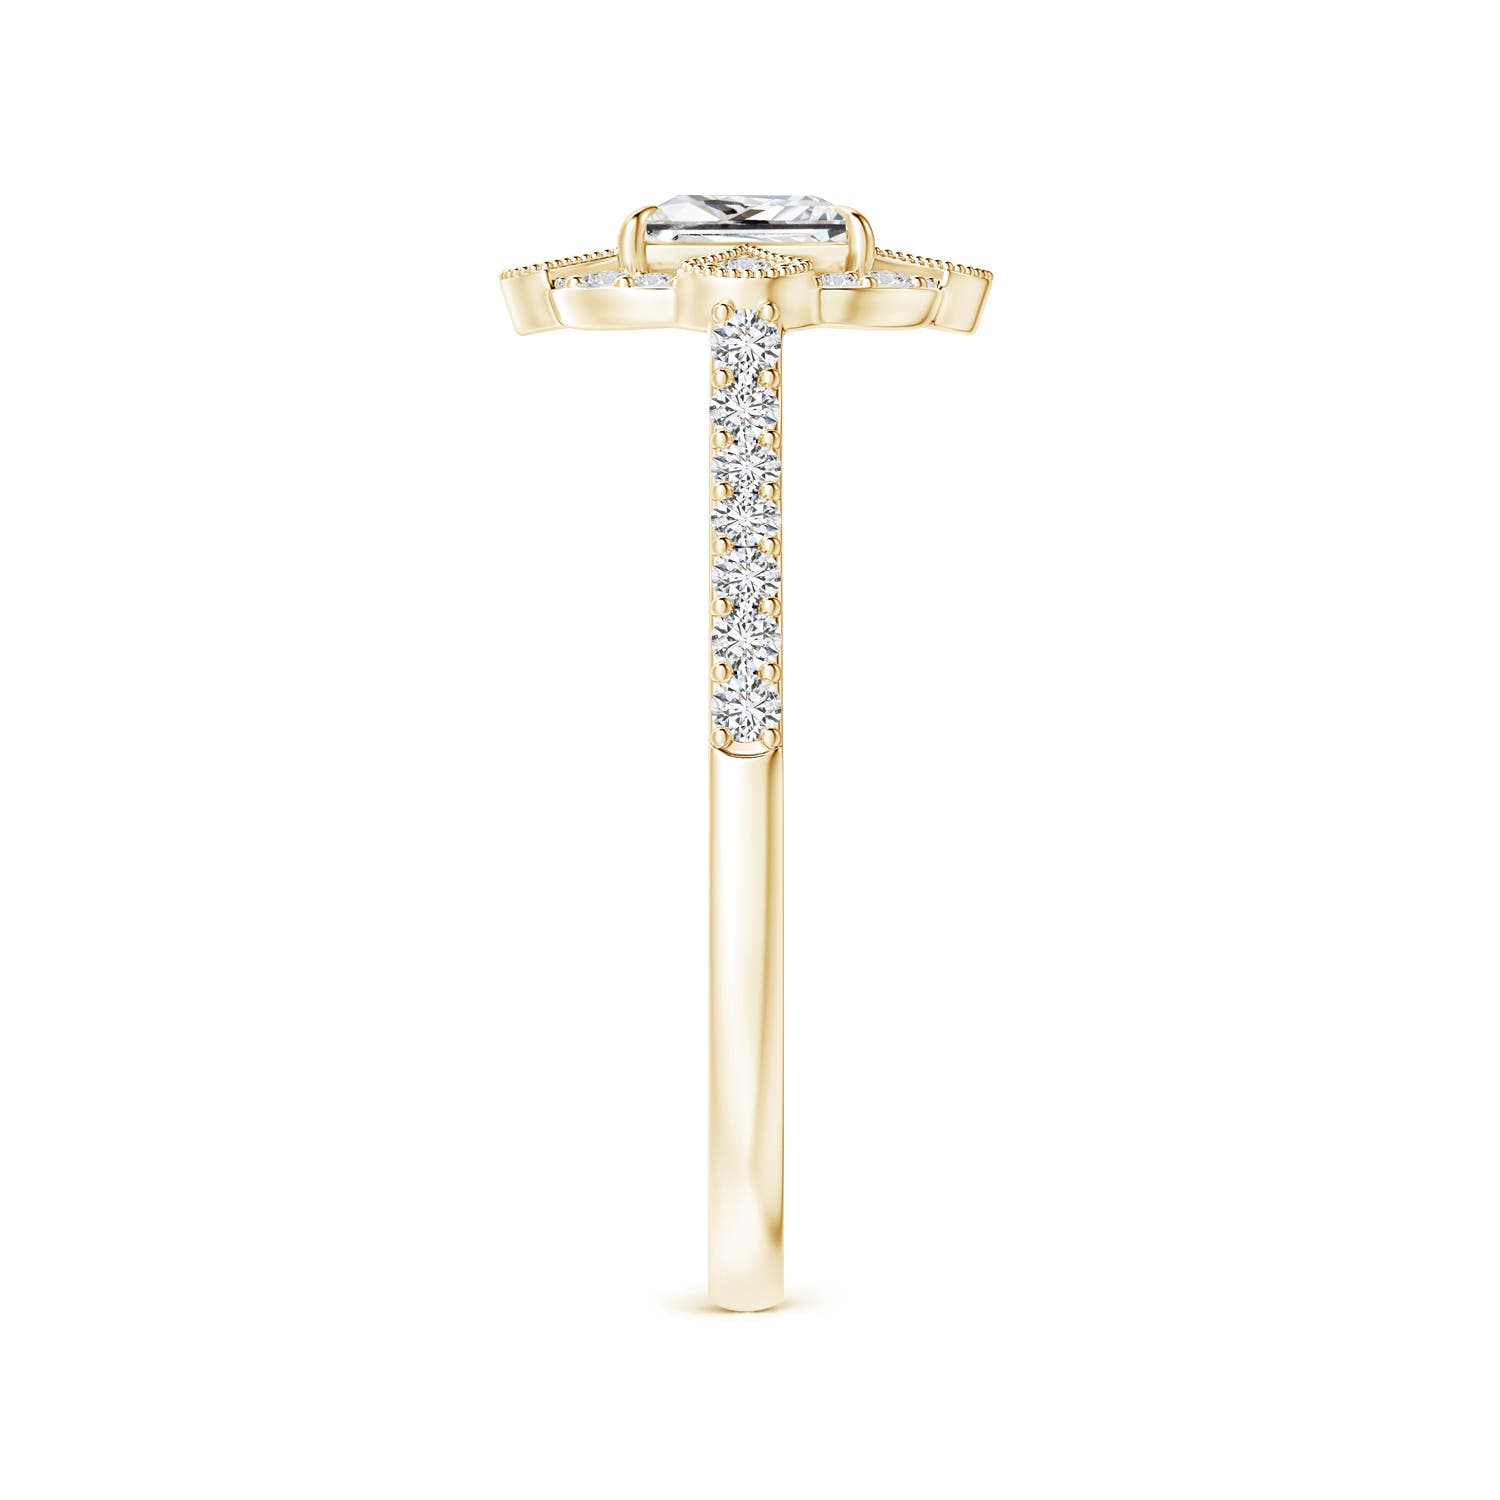 H, SI2 / 0.9 CT / 14 KT Yellow Gold